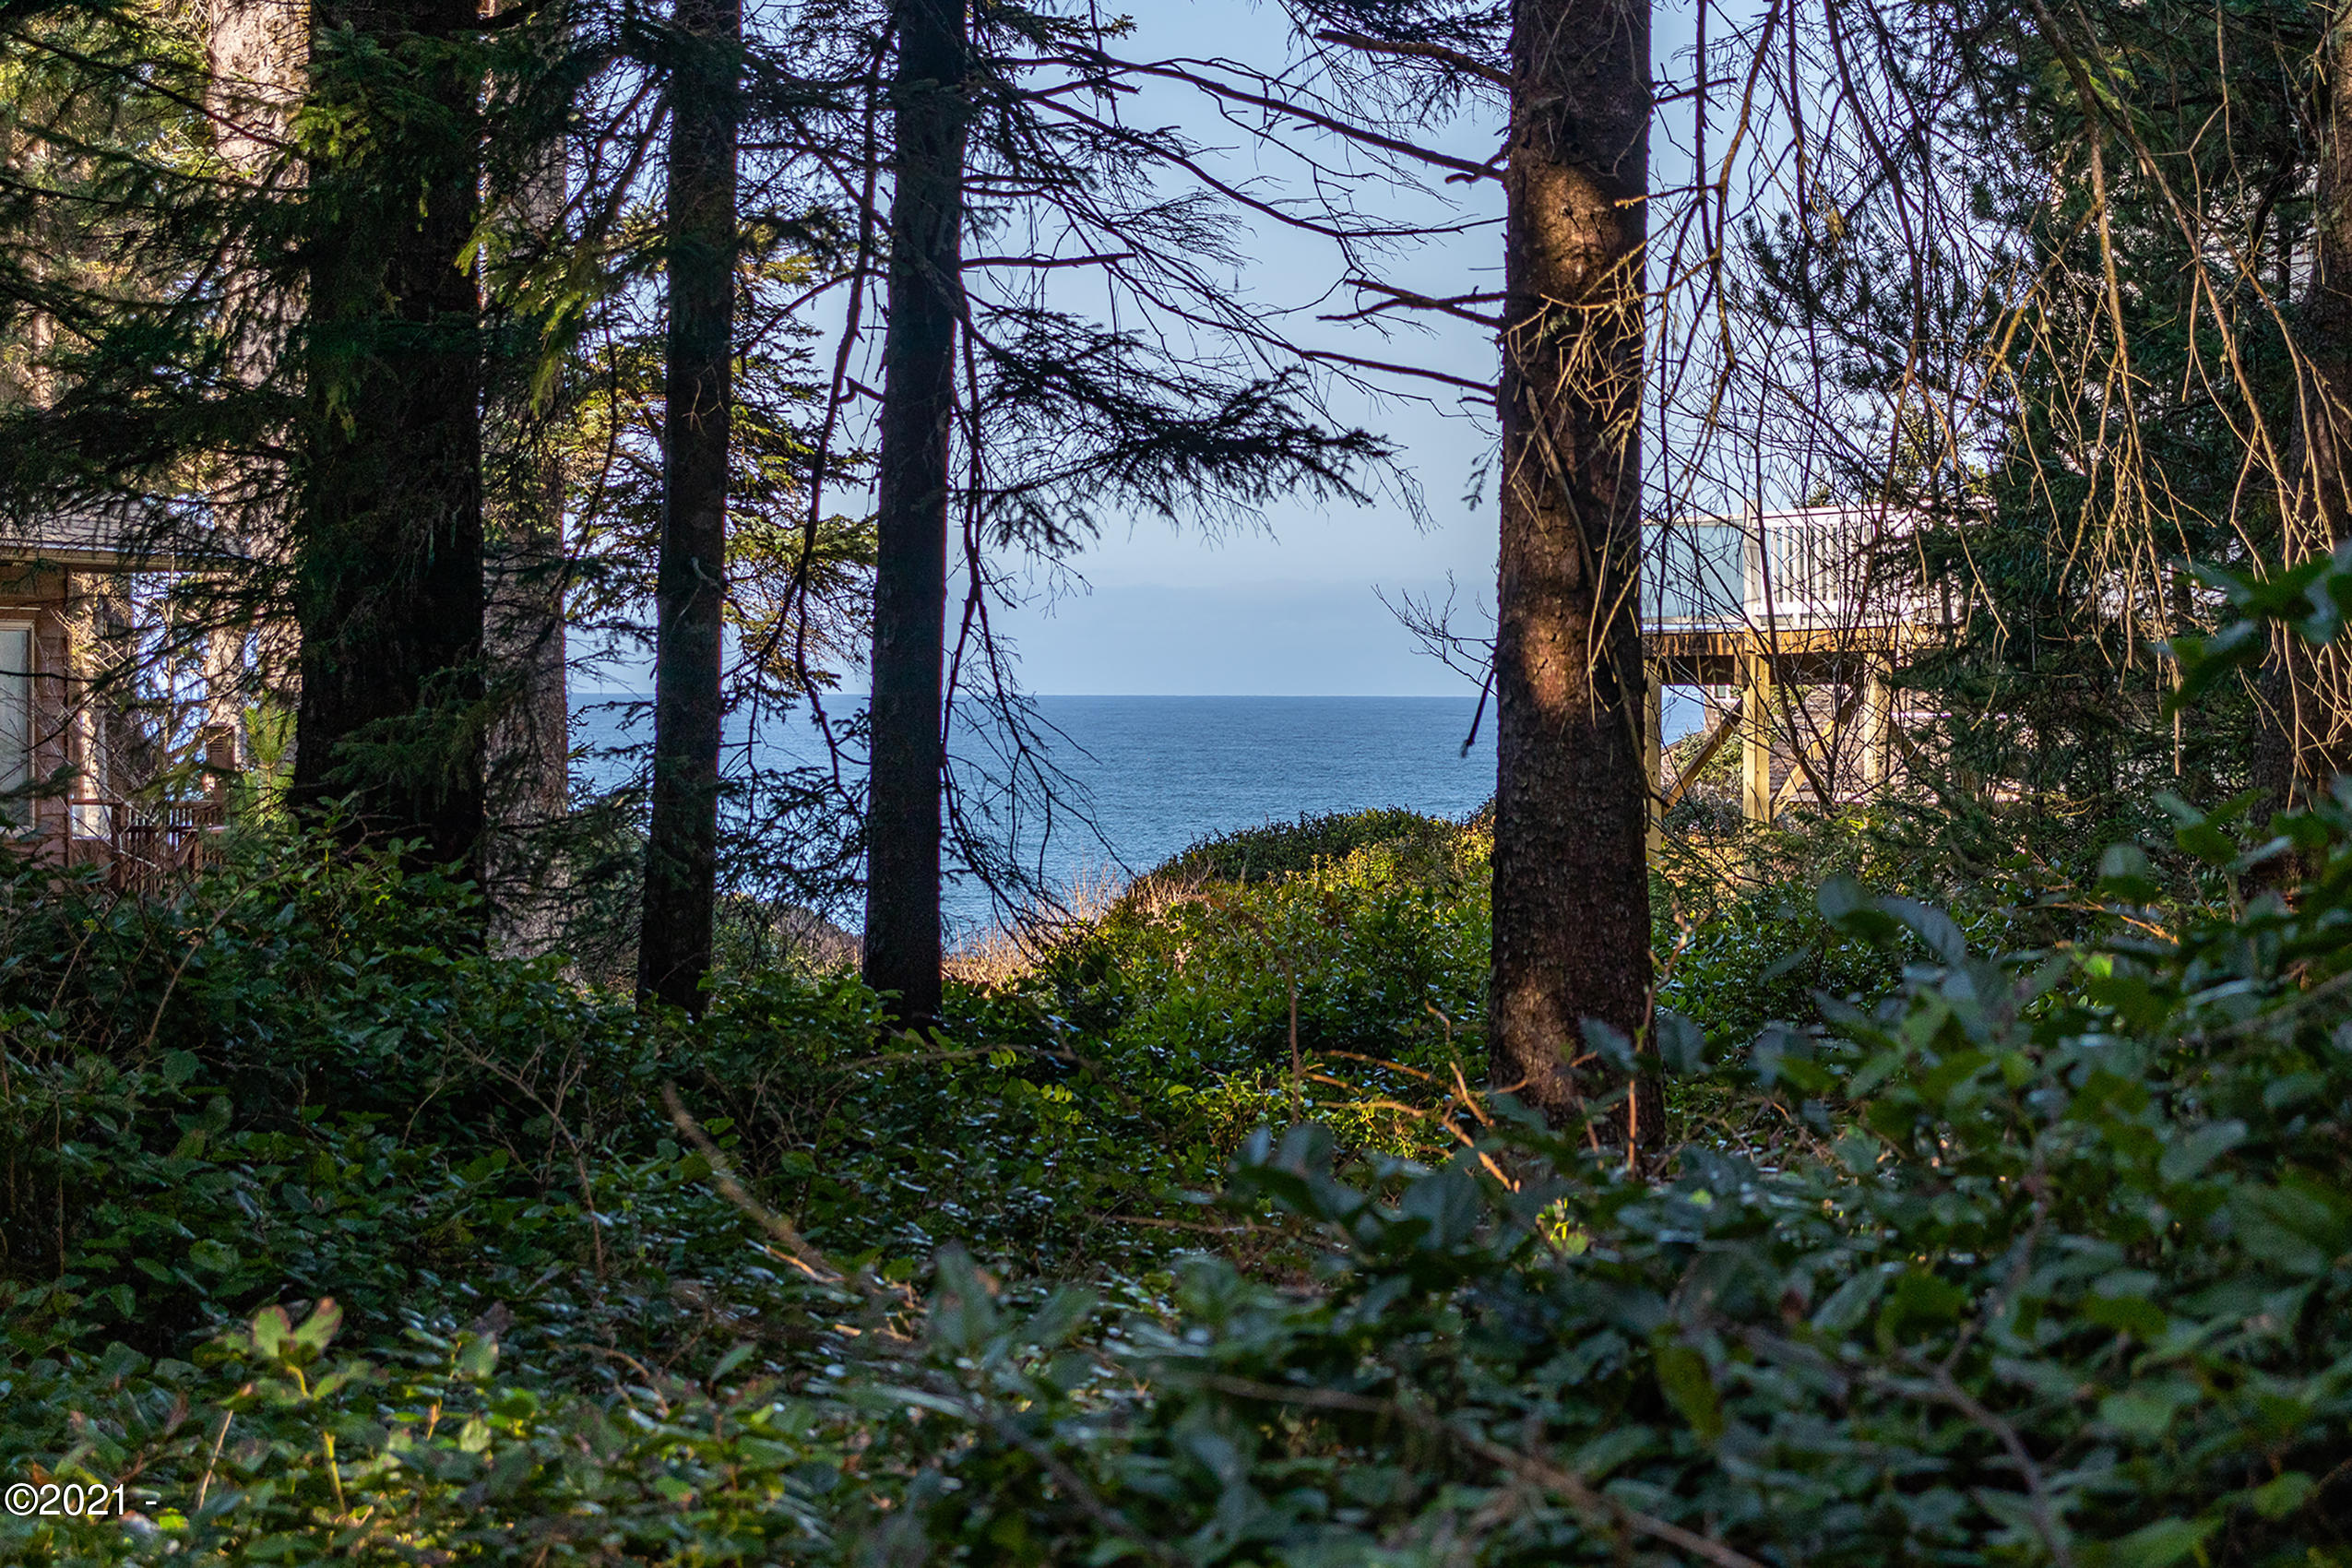 Lot 84 SW Walking Wood Depoe Bay, Gleneden Beach, Lincoln City, Newport, Otis, Rose Lodge, Seal Rock, Waldport, Yachats, To Home Listings - Amy Plechaty, Emerald Coast Realty Real Estate, homes for sale, property for sale